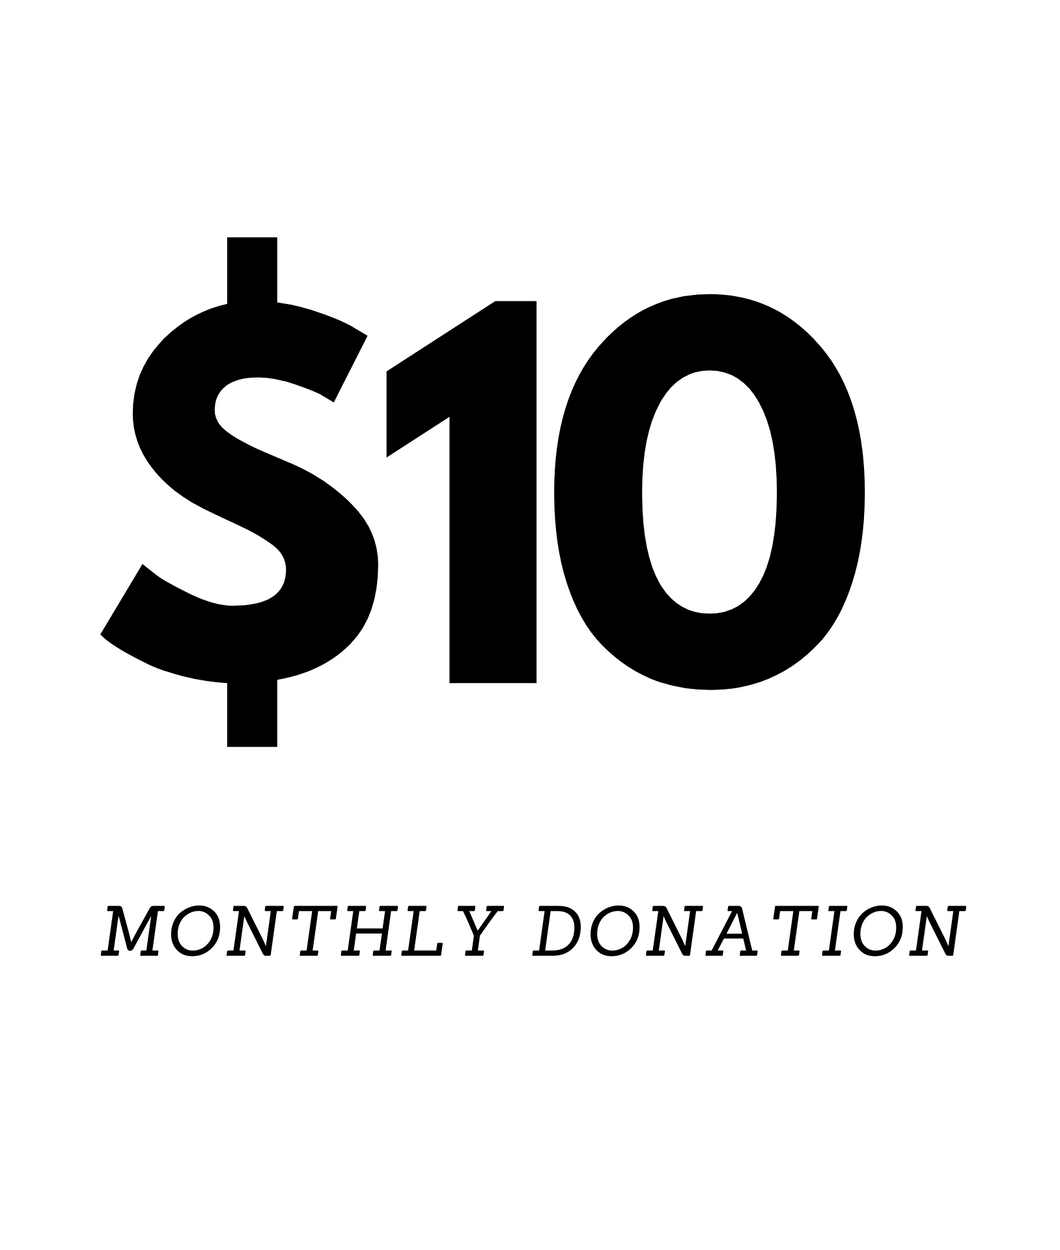 $10 Monthly Donation